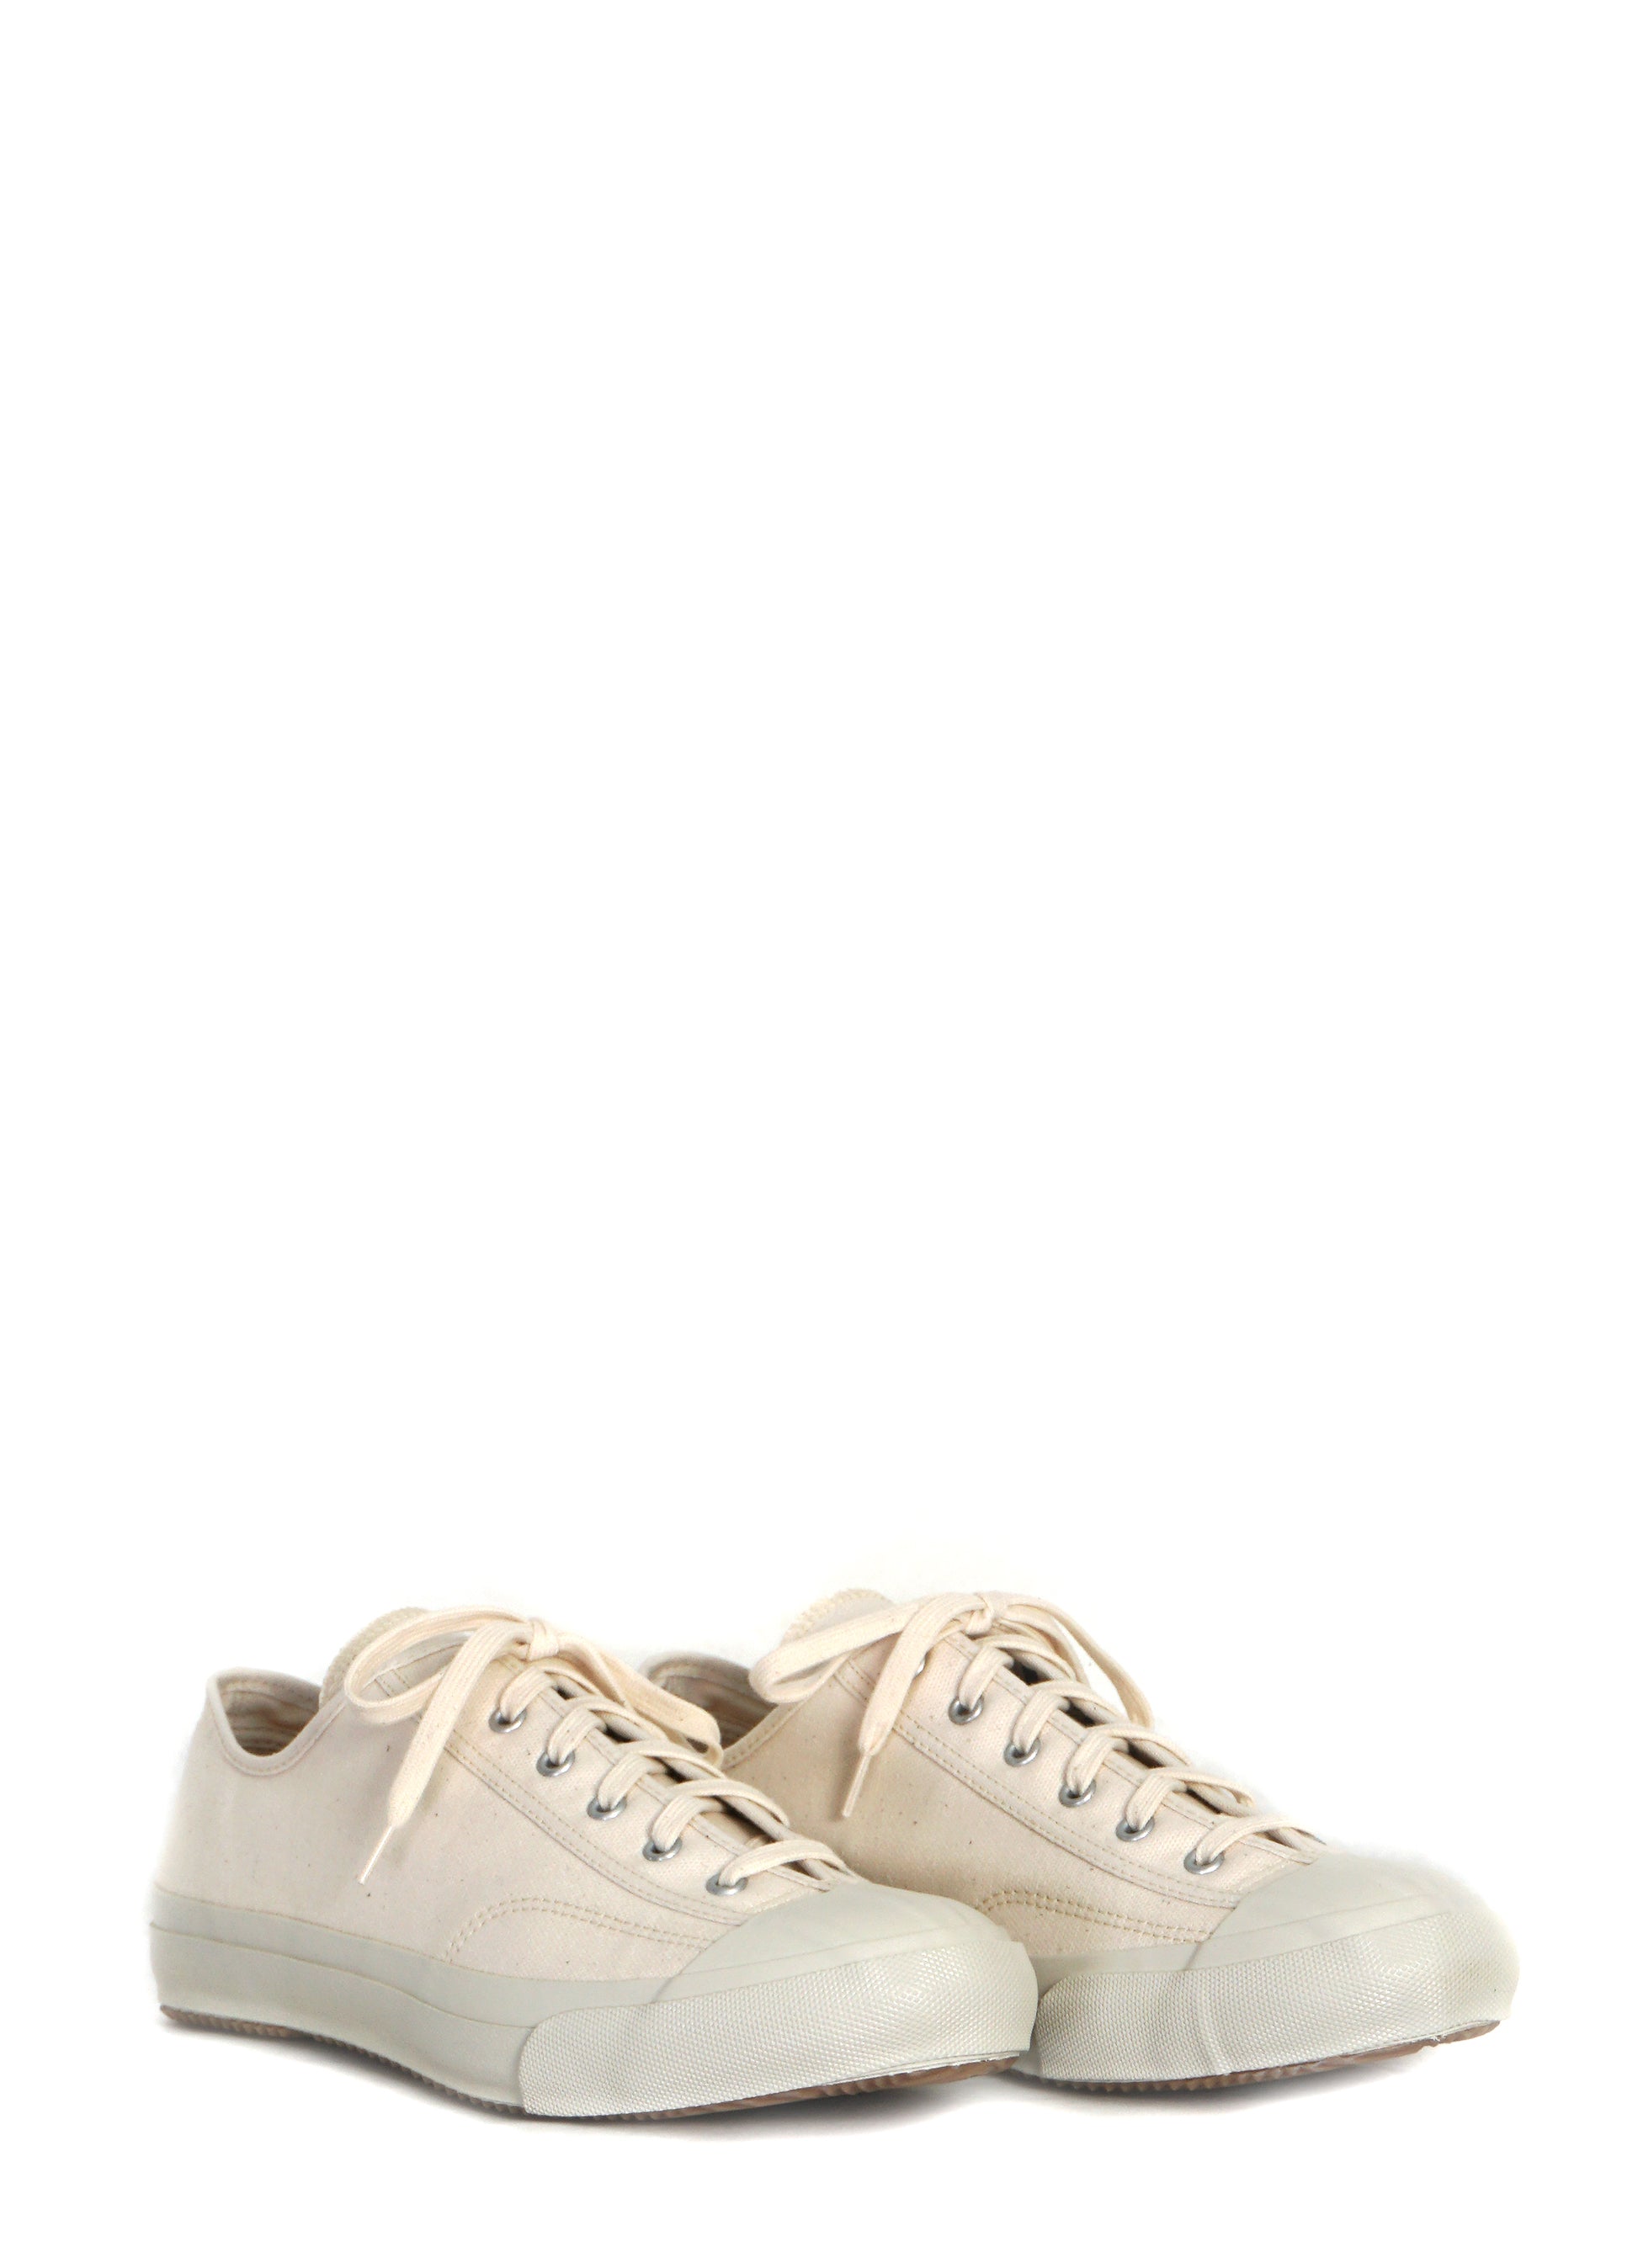 GYM CLASSIC | Canvas Vulcanised Sole Sneaker | White